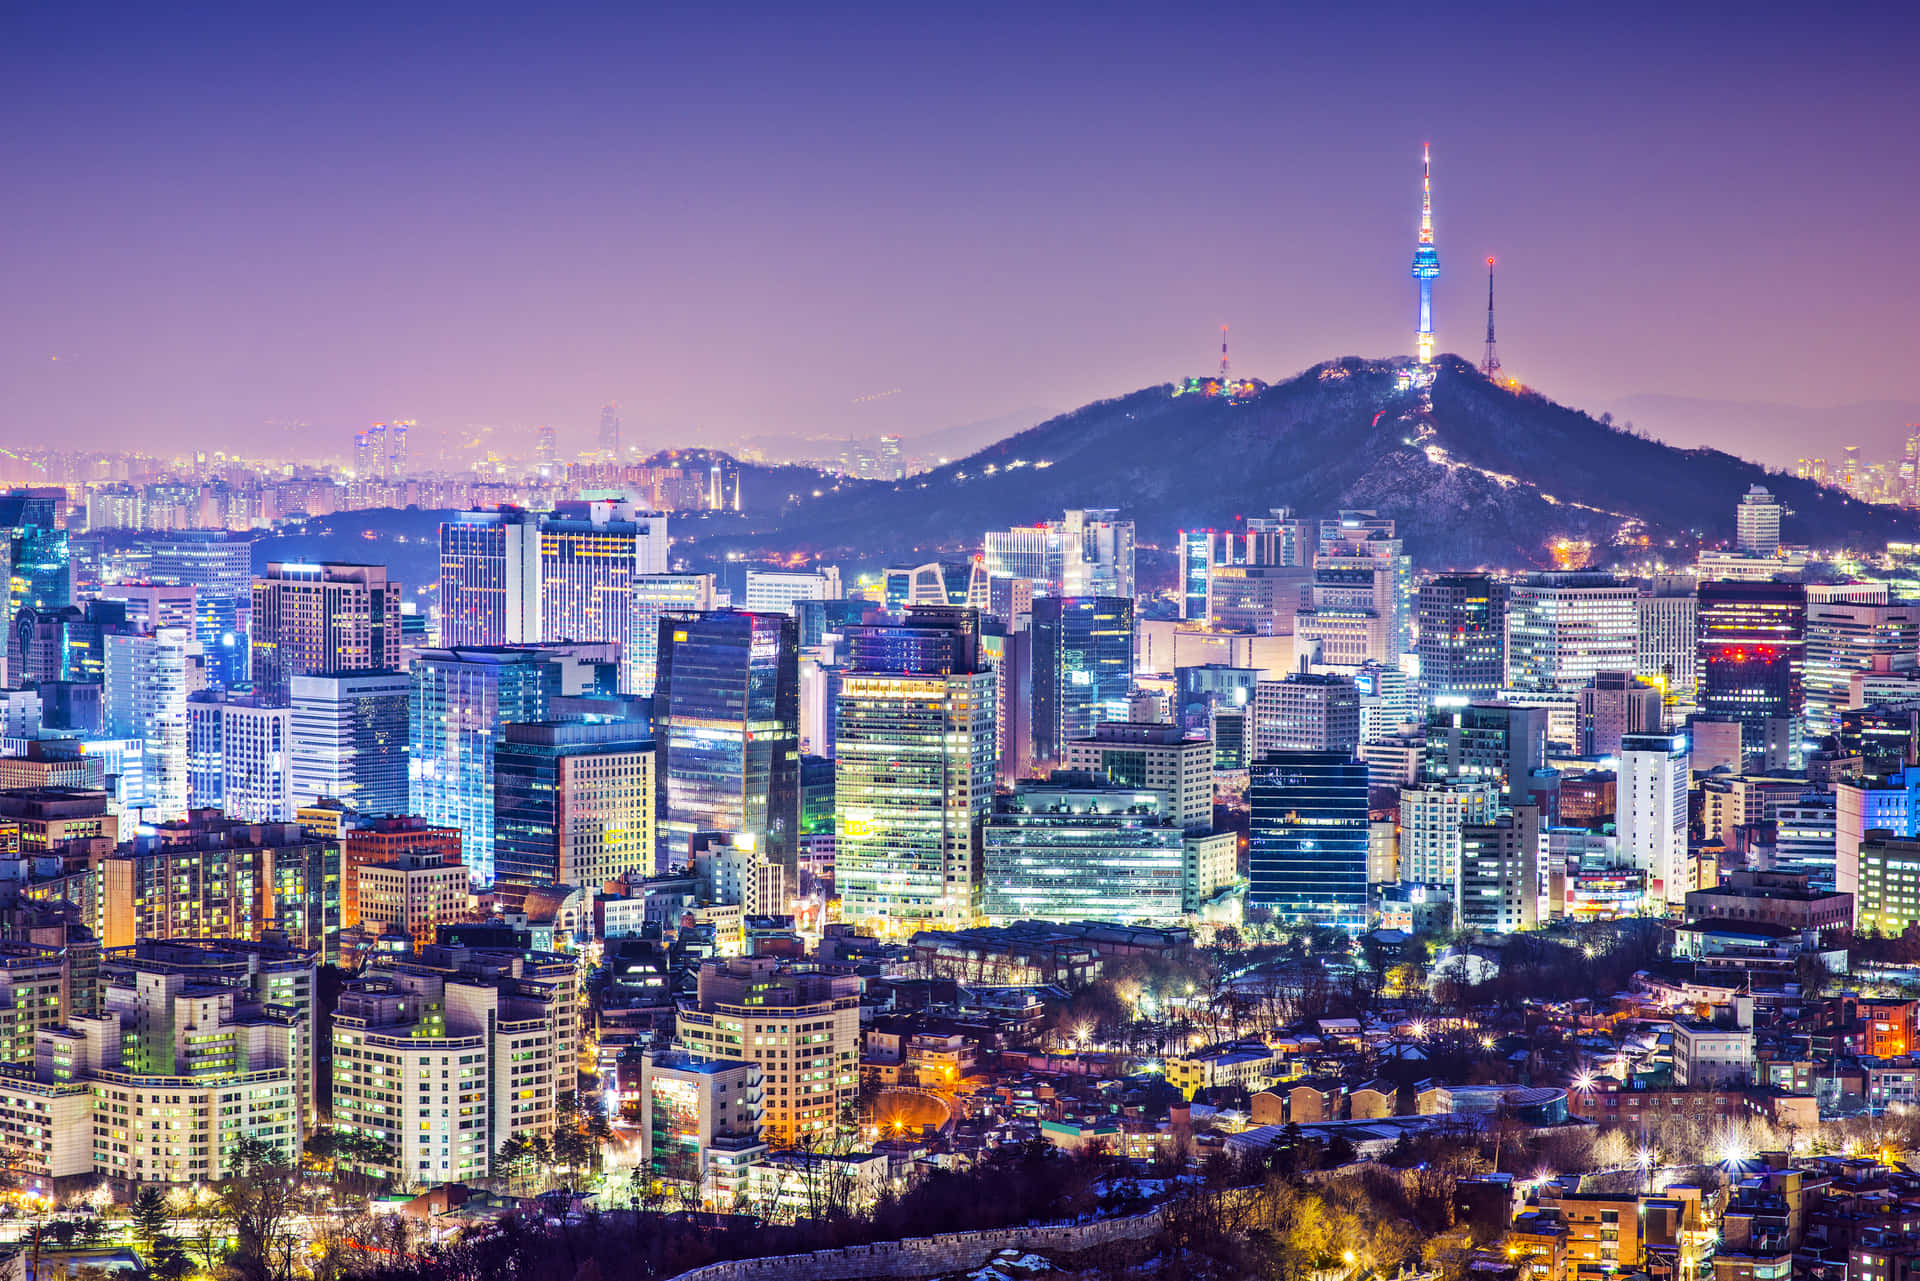 Stunning evening view of downtown Seoul, South Korea